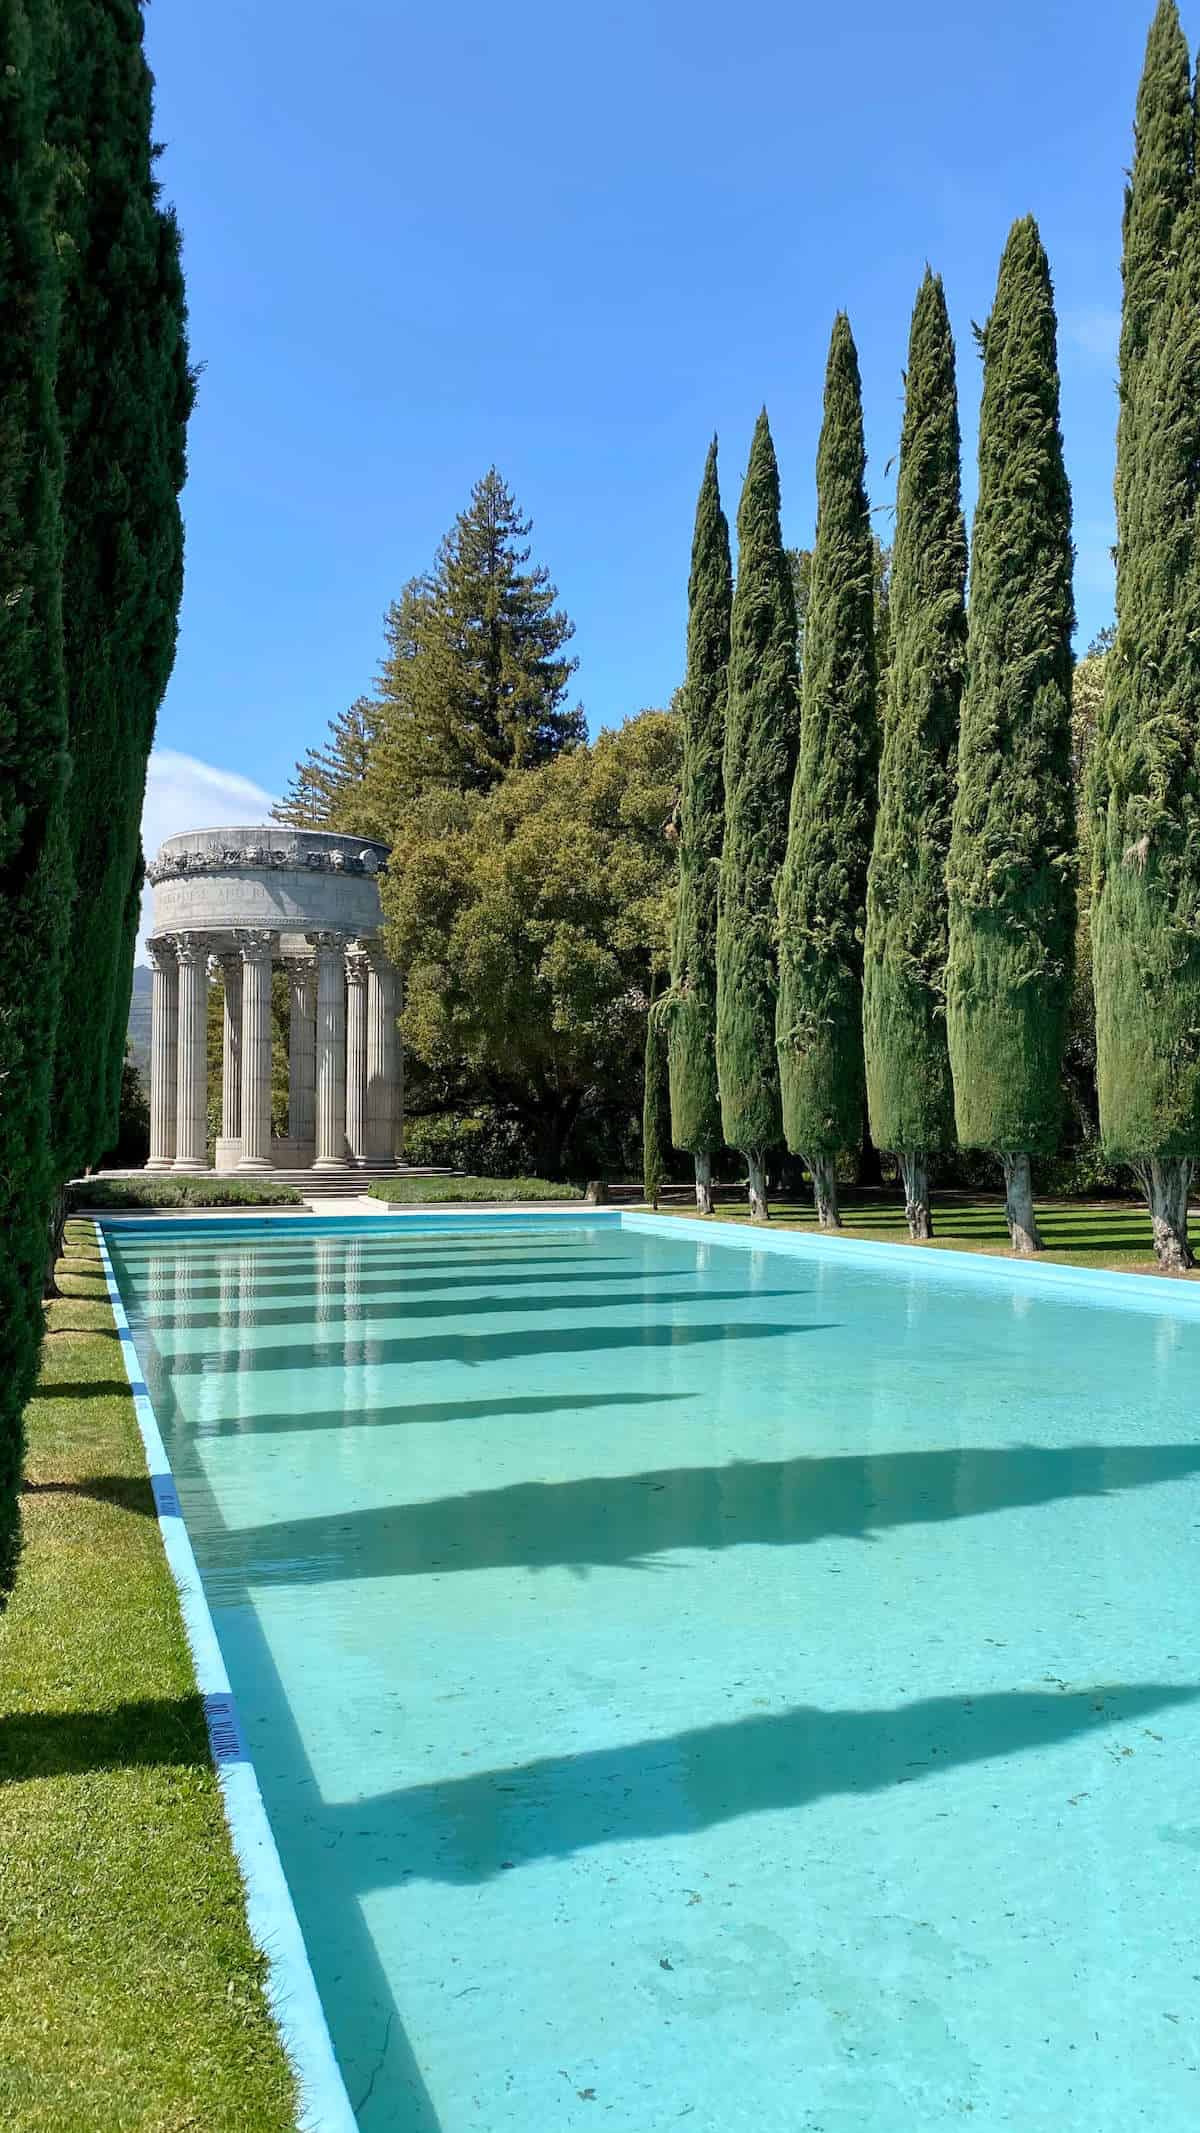 The Pulgas Water Temple in San Mateo